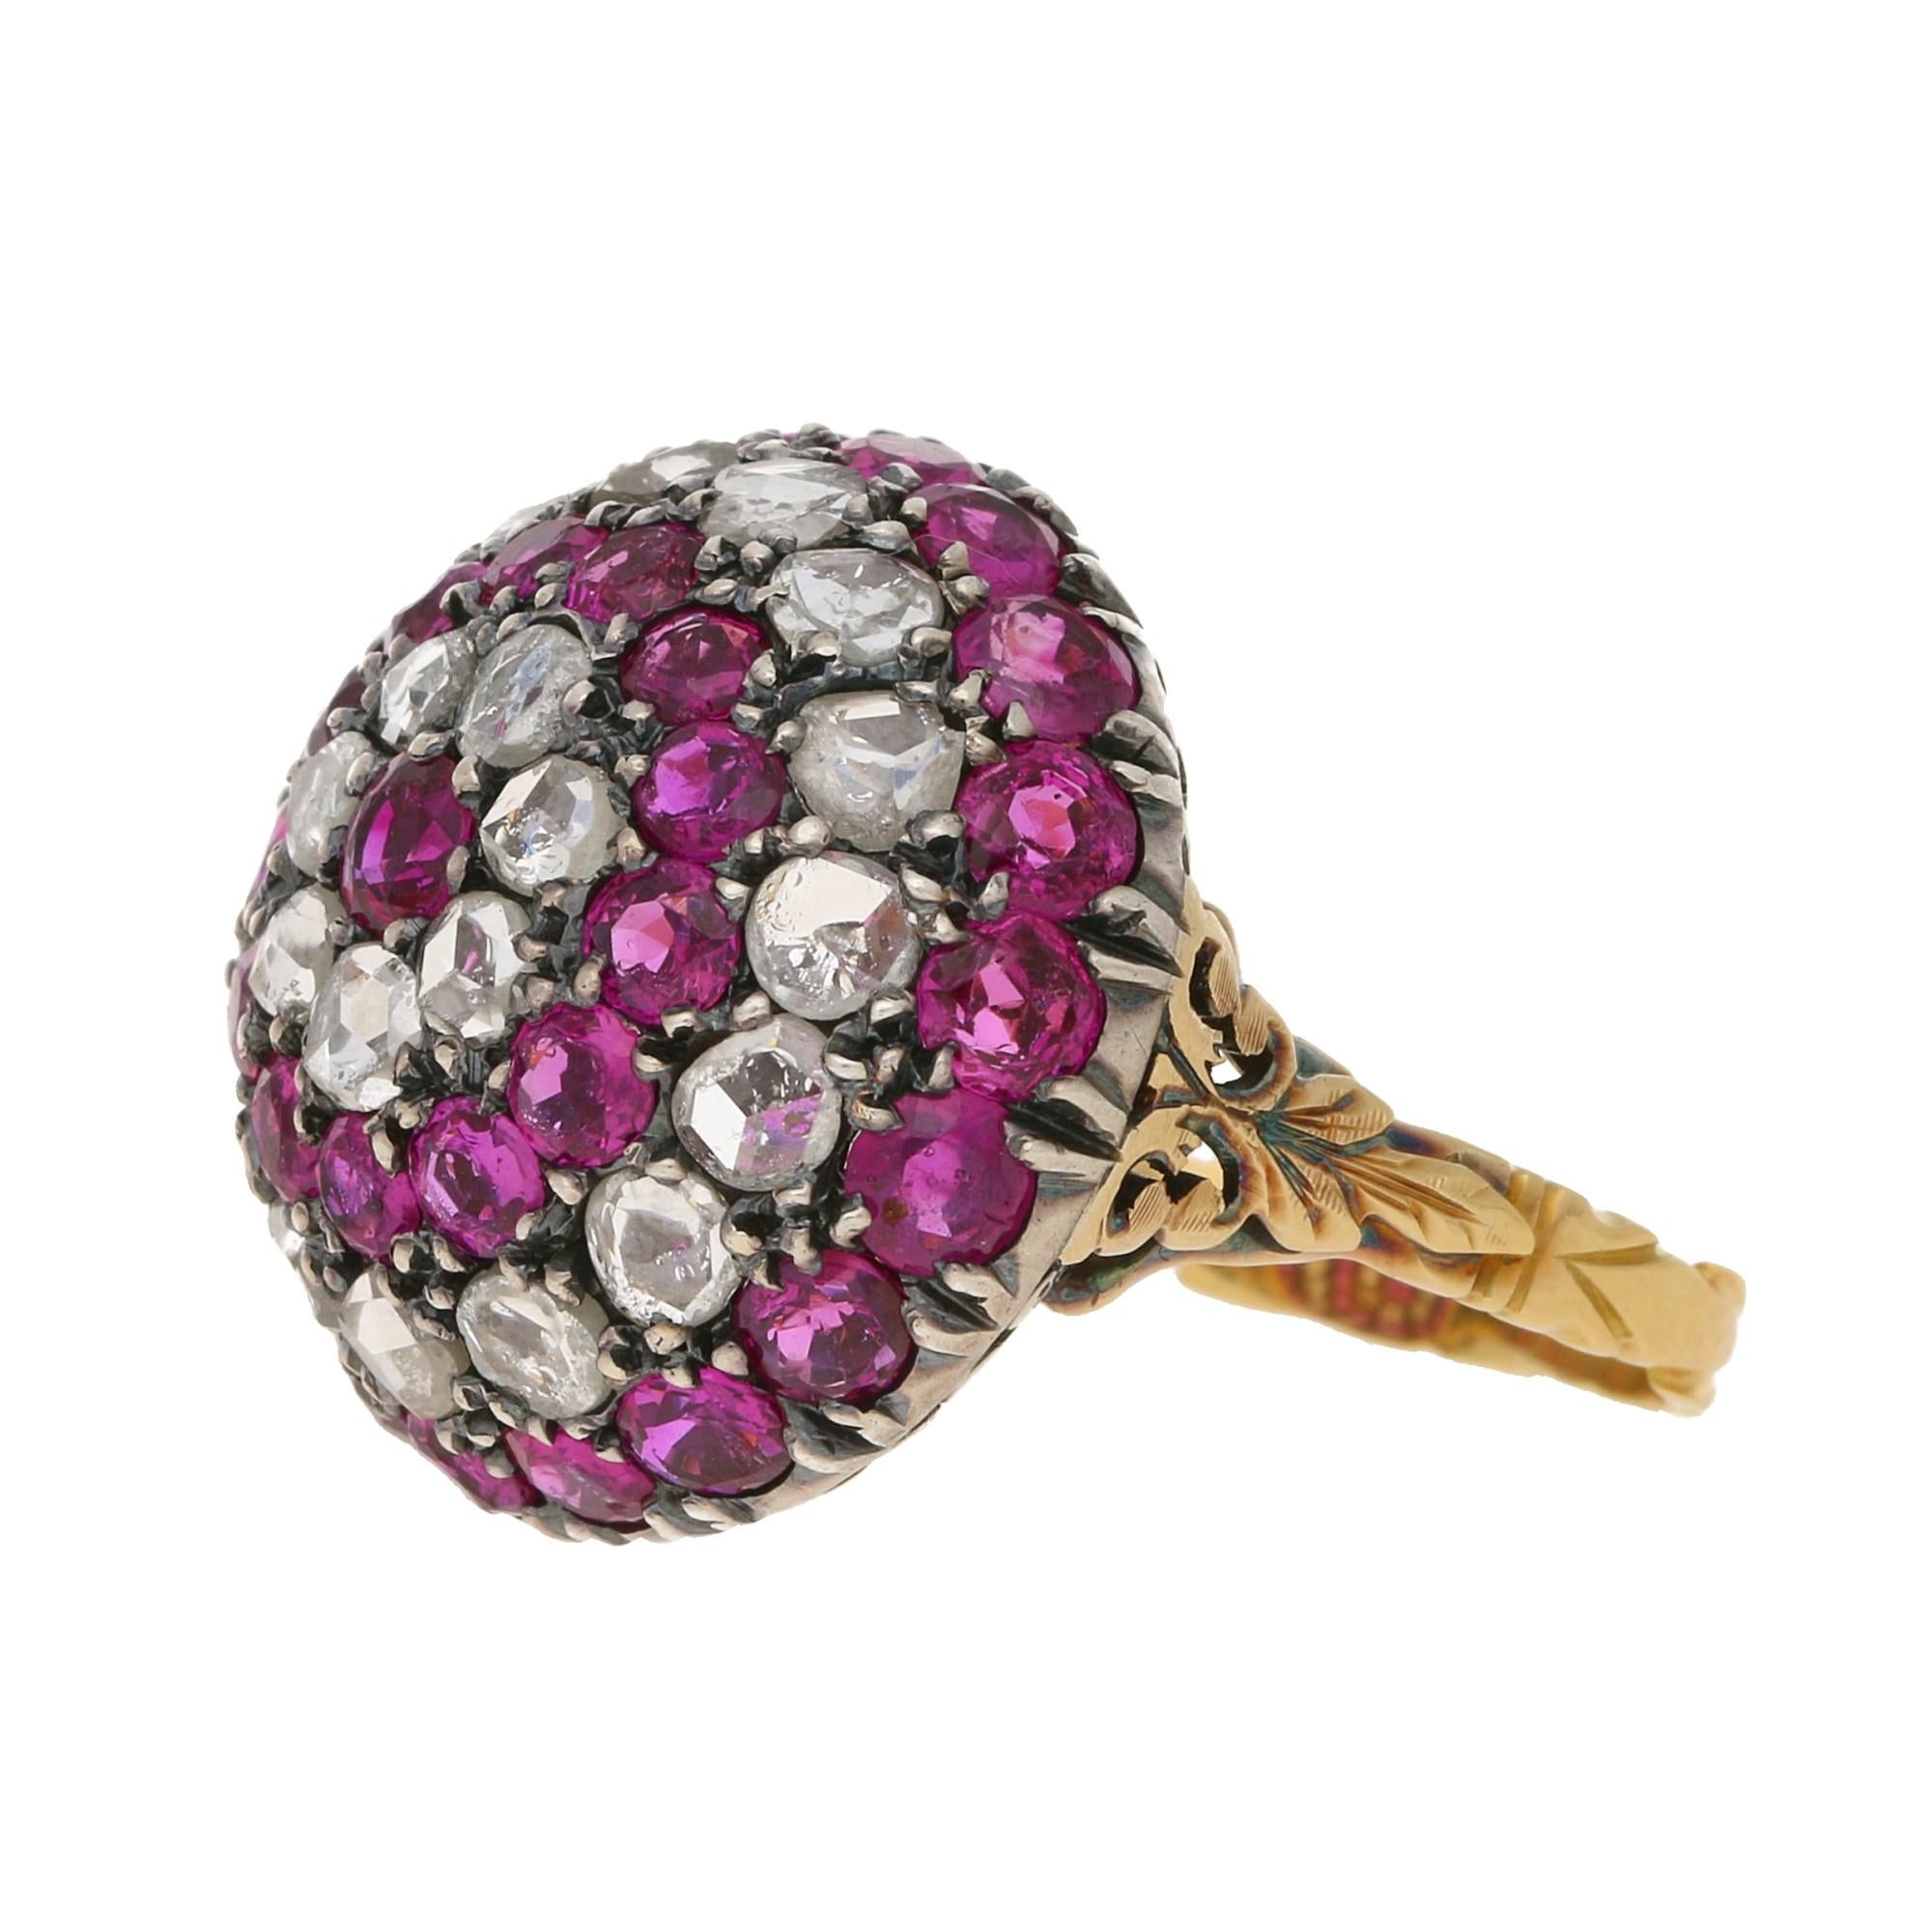 A Late Georgian style bombe cocktail ring claw set with thirty three Burmese rubies and twenty two rose-cut diamonds set in silver on gold. The underside of the ring is adorned with an ornate pierced openwork undercarriage leading to a gold carved